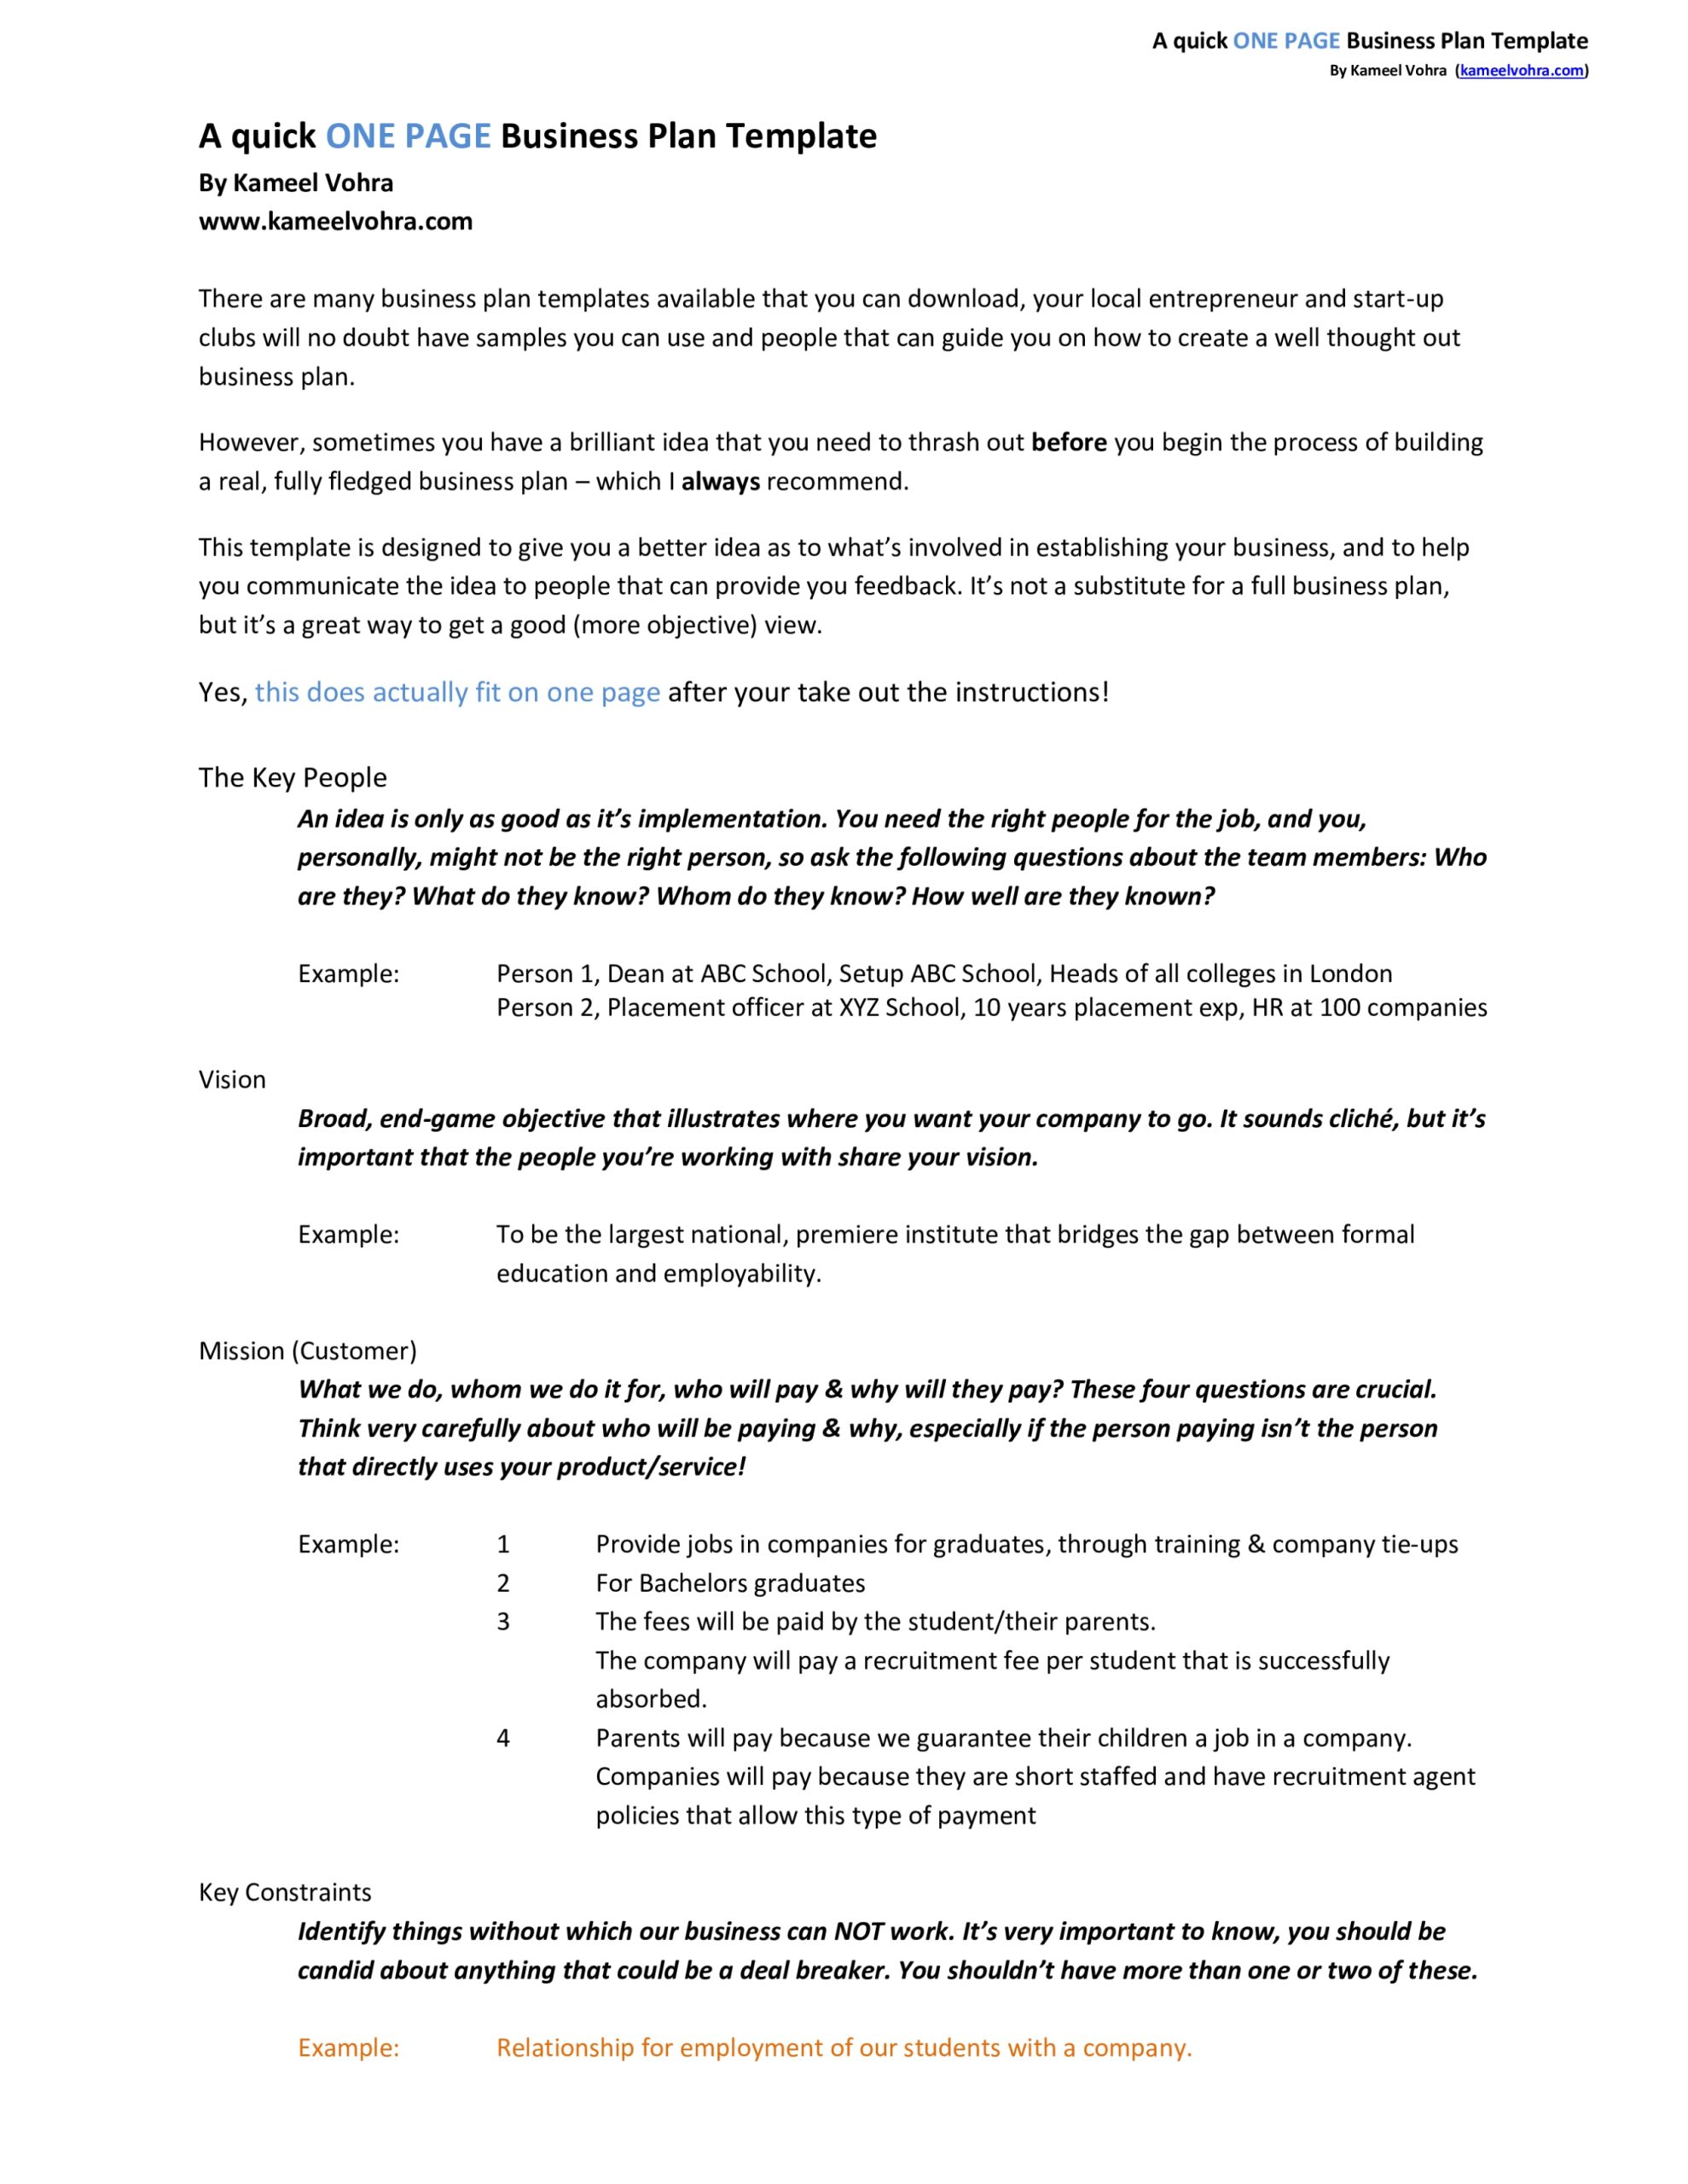 A Quick One Page Business Plan Template - Eloquens With Business One Sheet Template